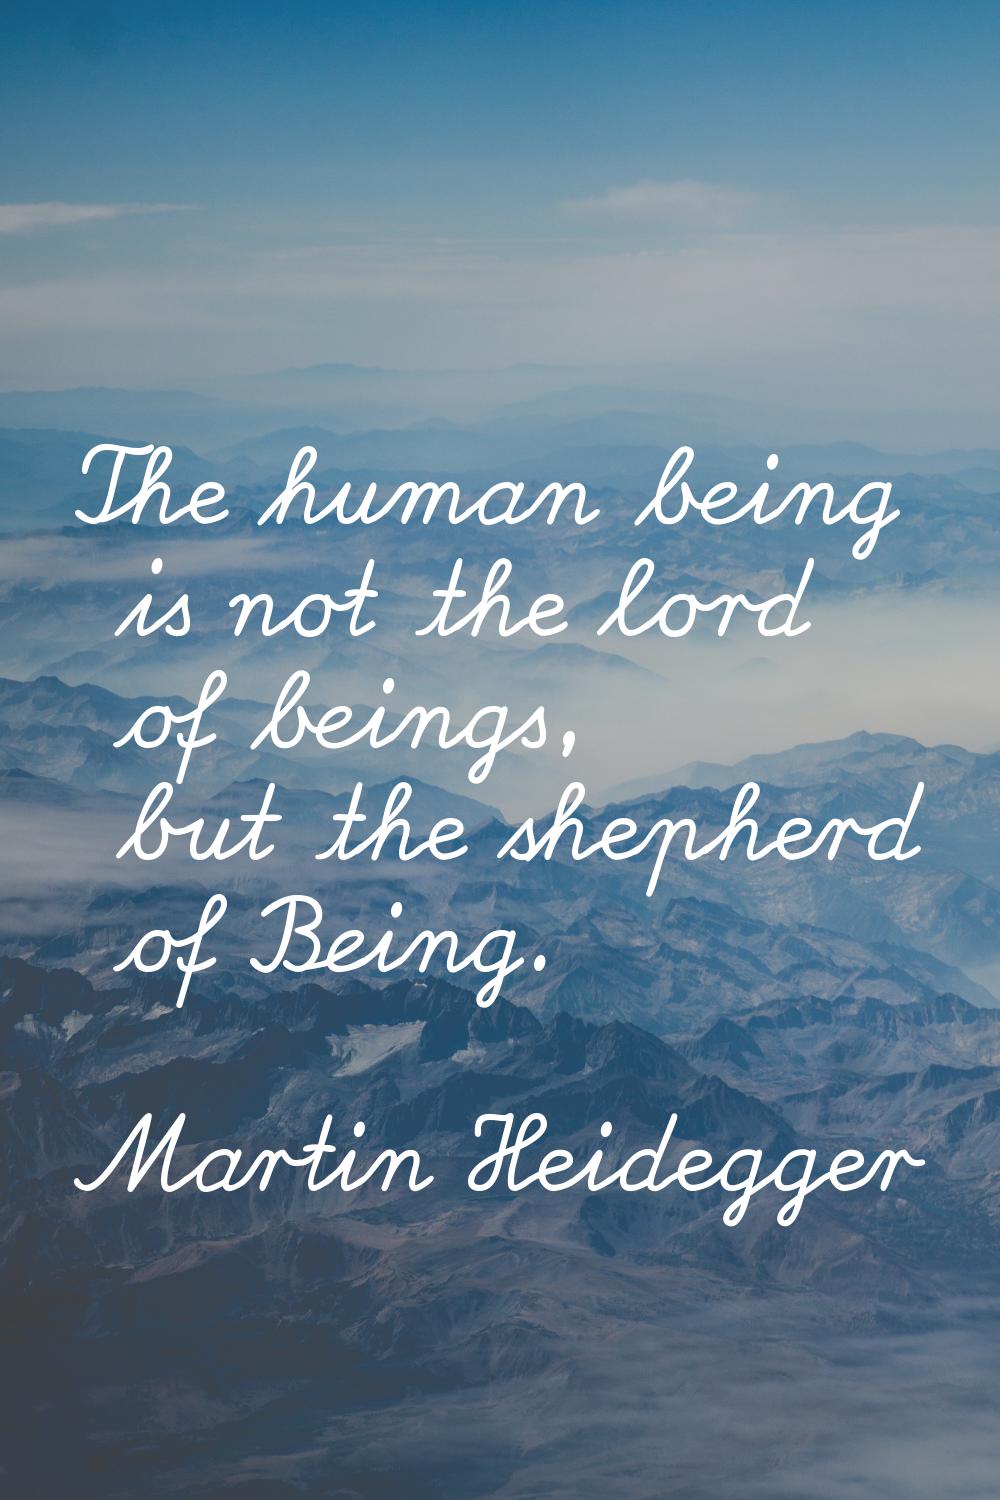 The human being is not the lord of beings, but the shepherd of Being.